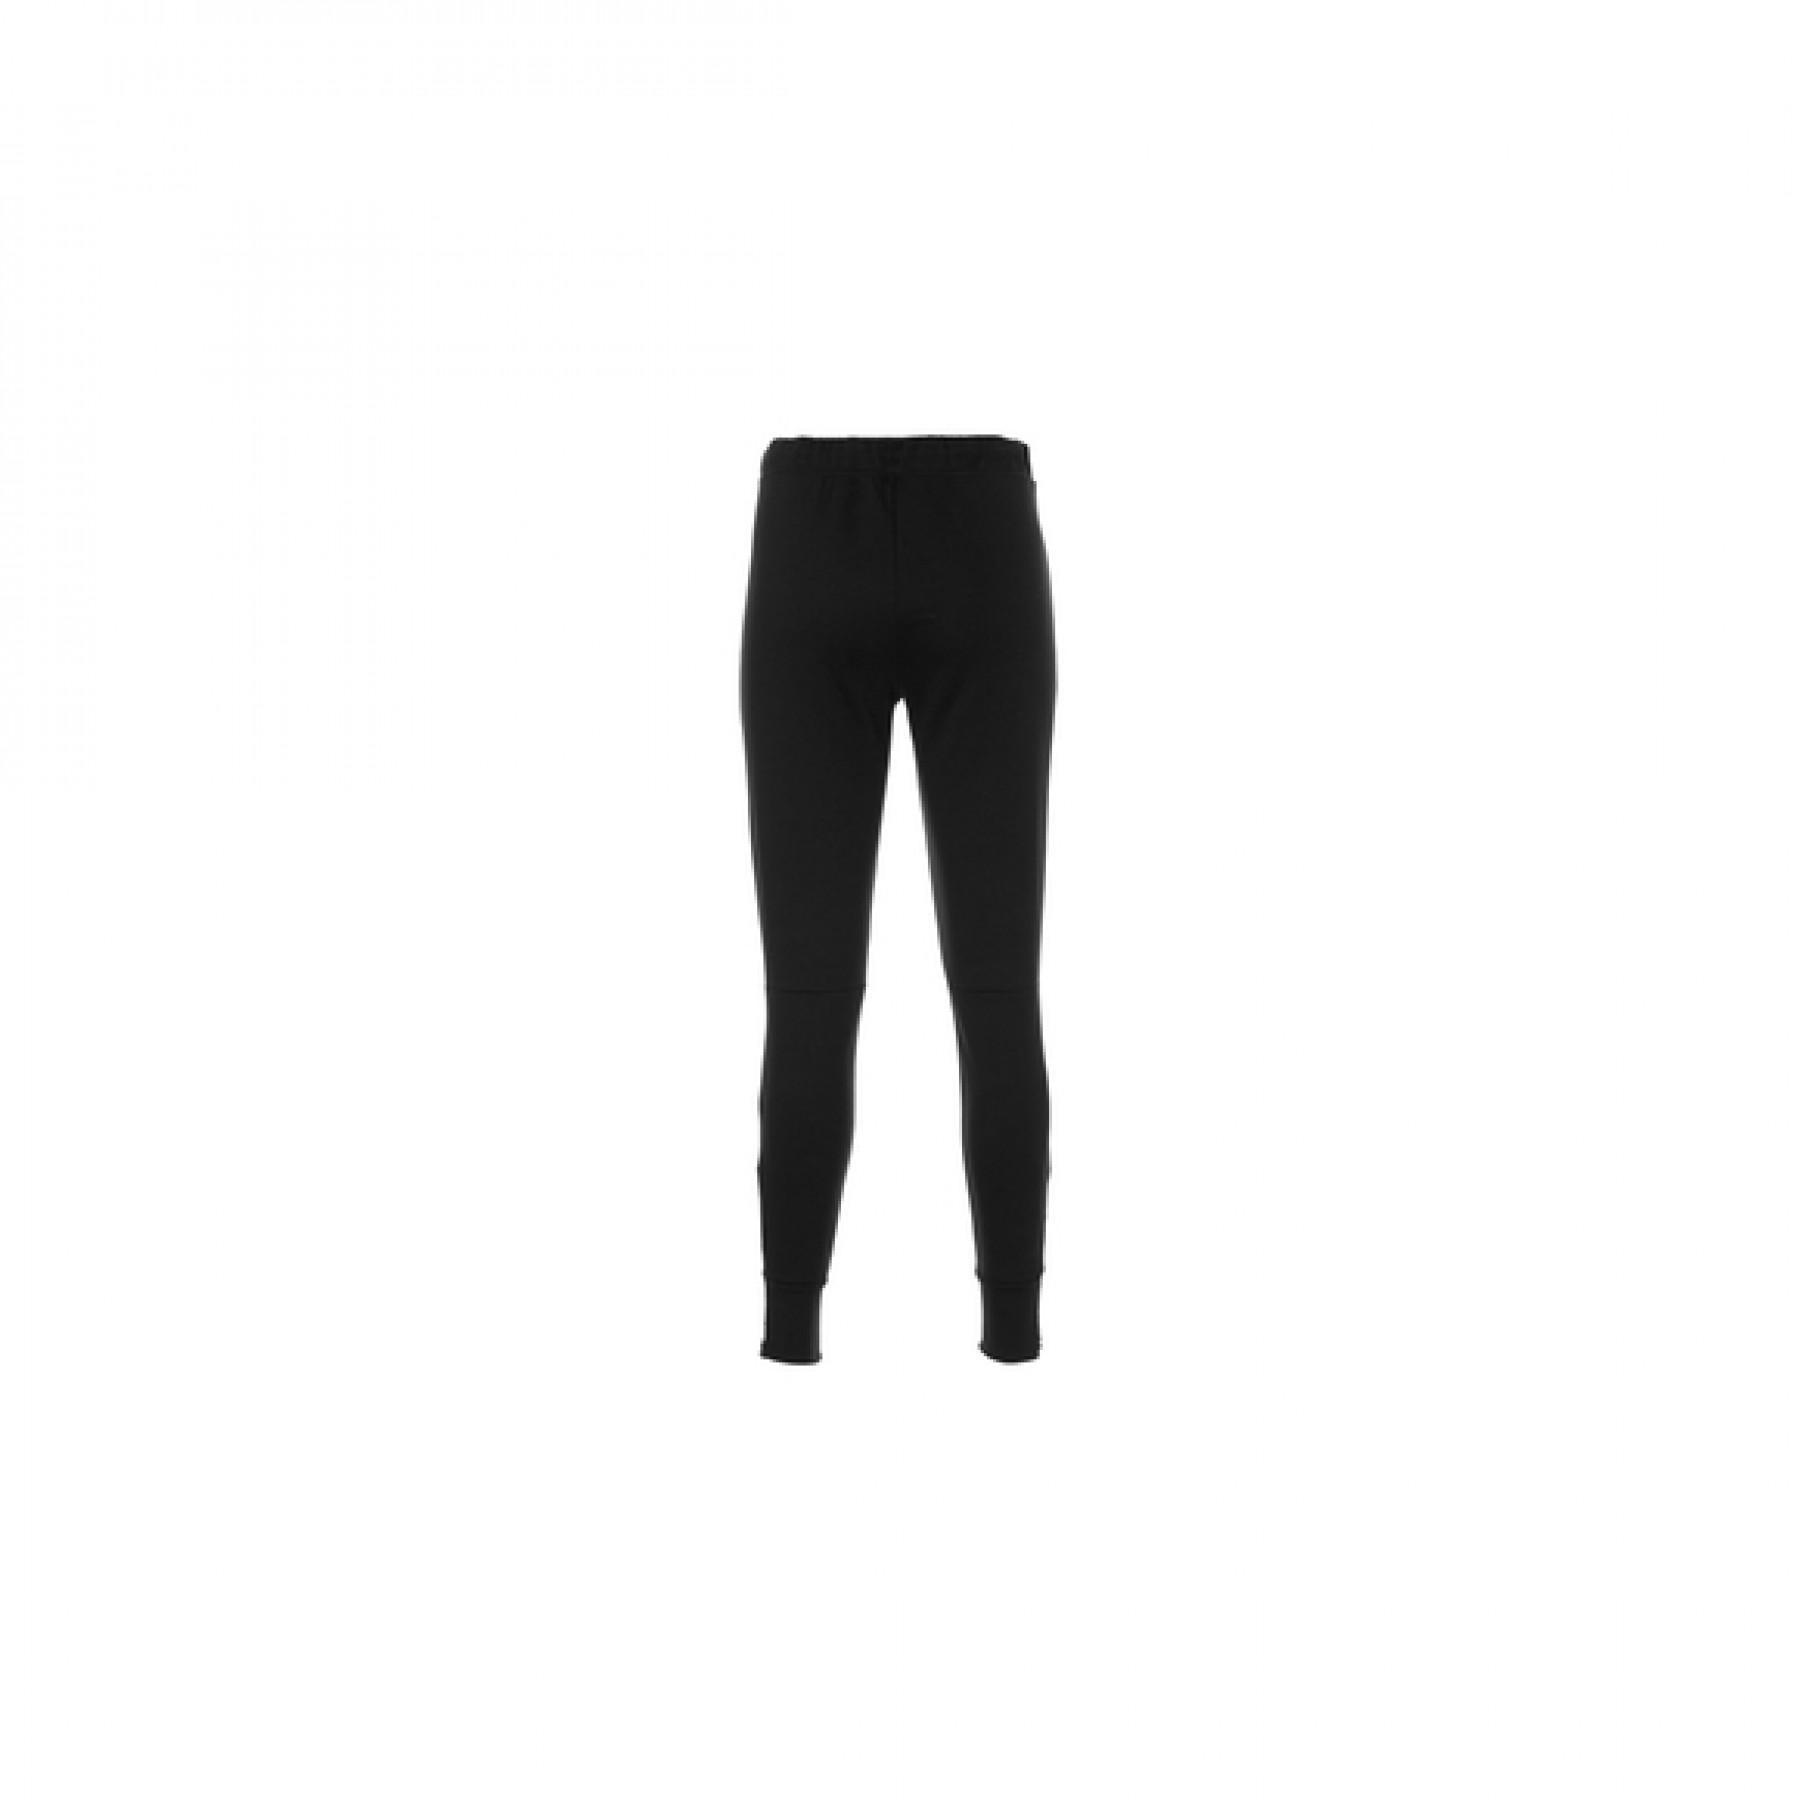 Women's trousers Asics tailored pant